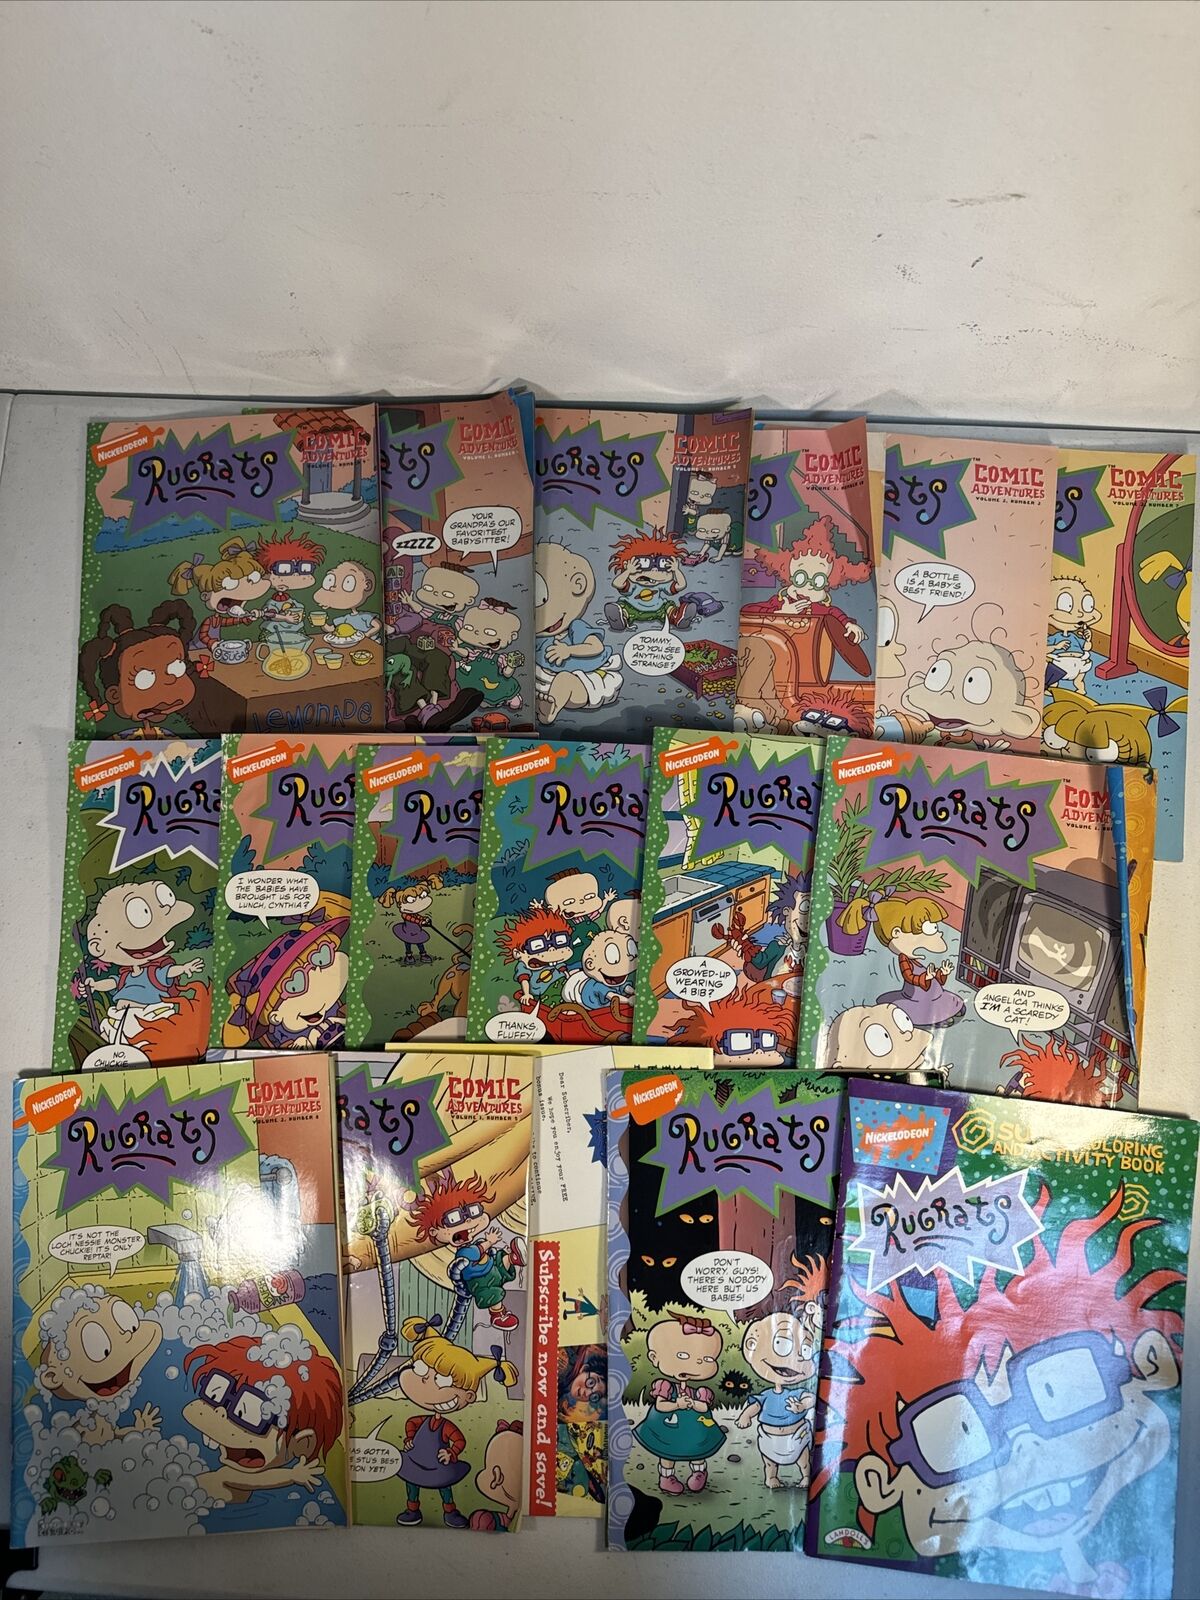 Rugrats Comic Adventure Lot of 17 - Nickelodeon 1990s - Best Offer Included